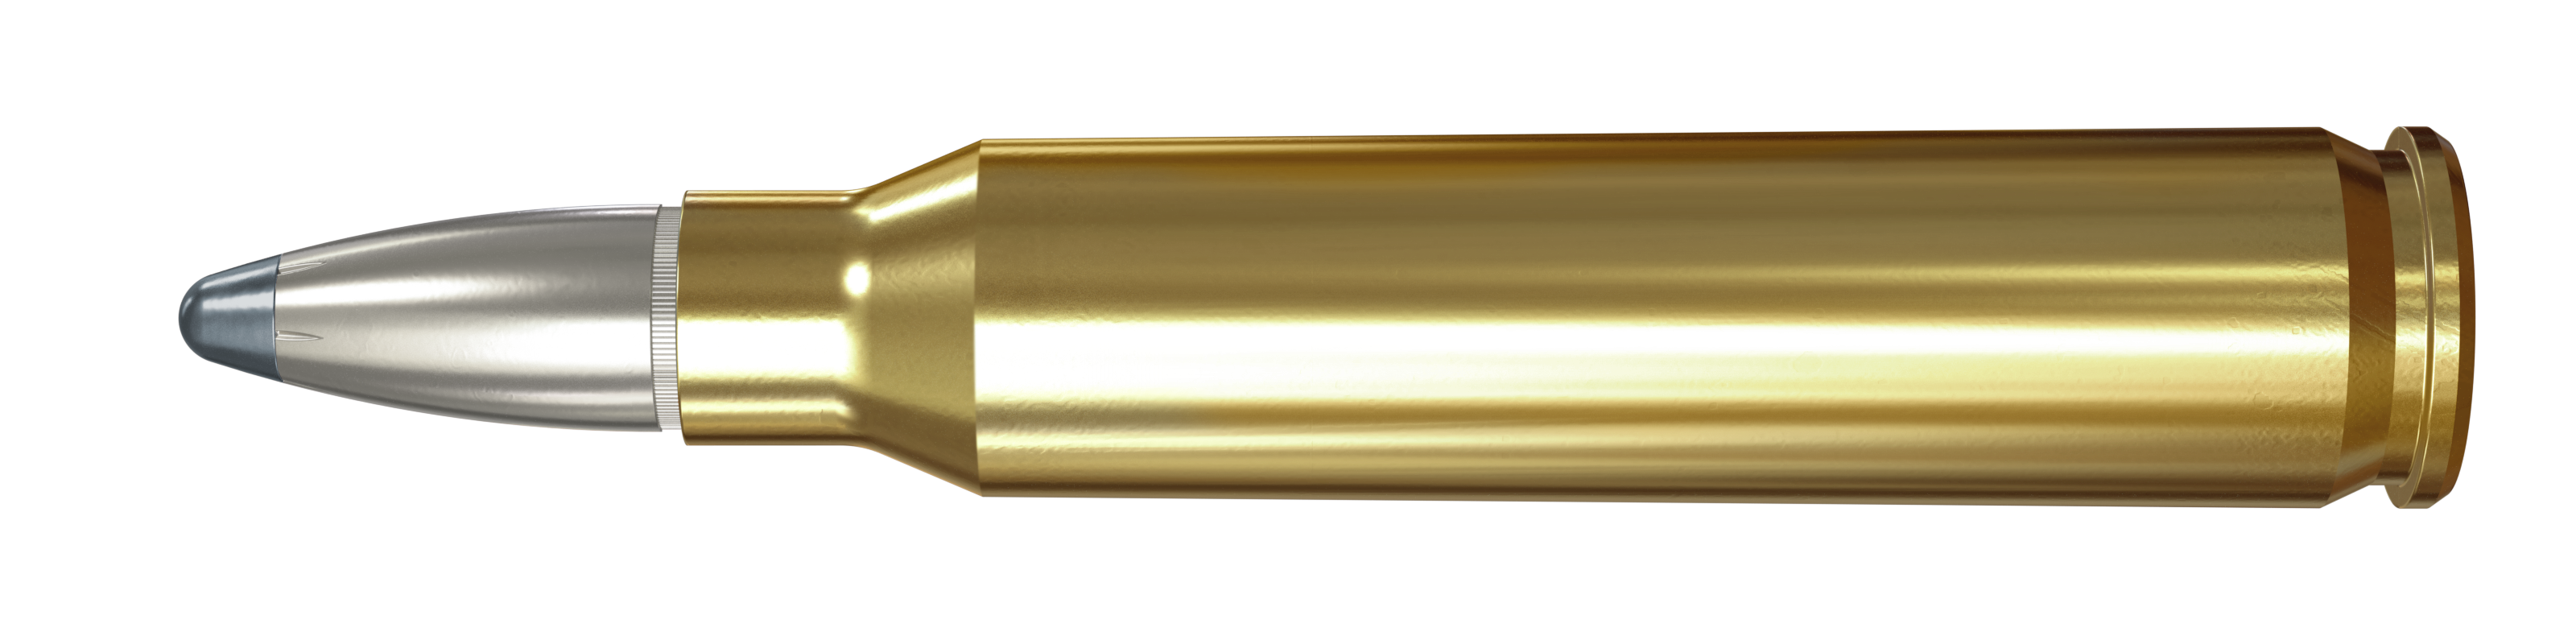 270 Winchester, 150 Grain Features